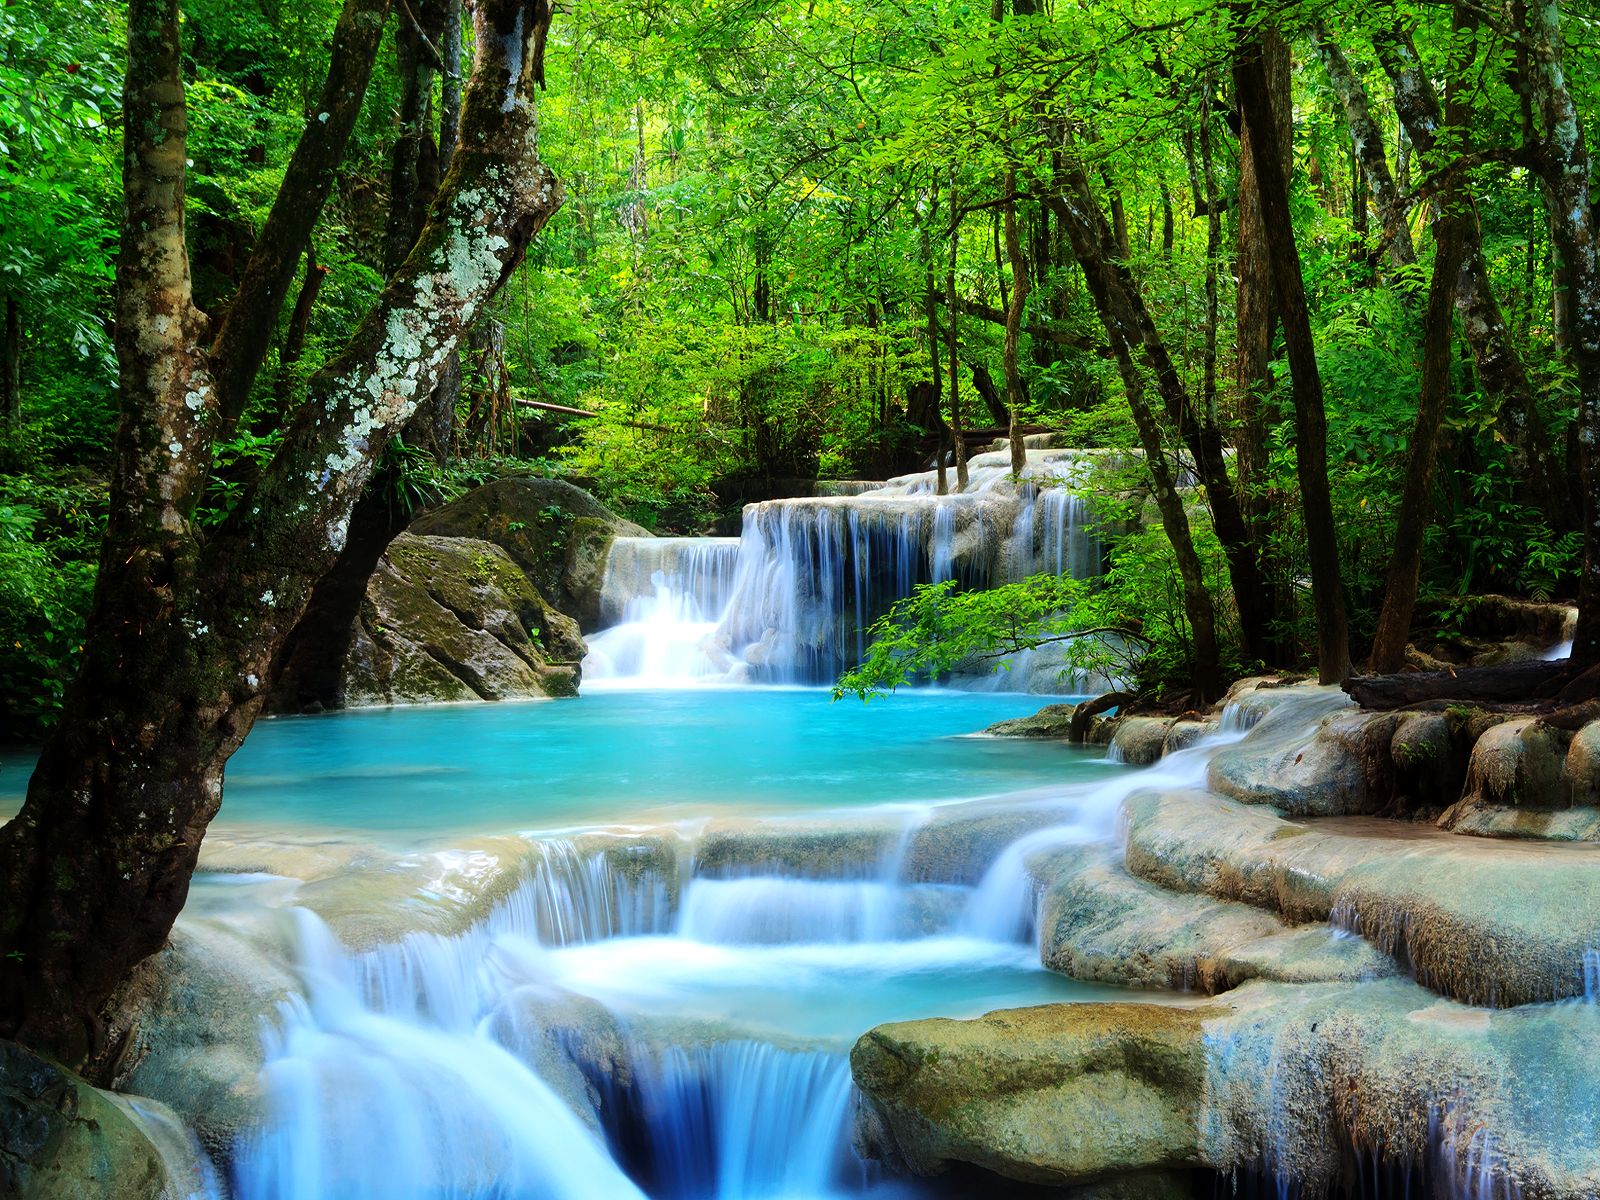  Waterfall is provided with high quality resolution for your desktop